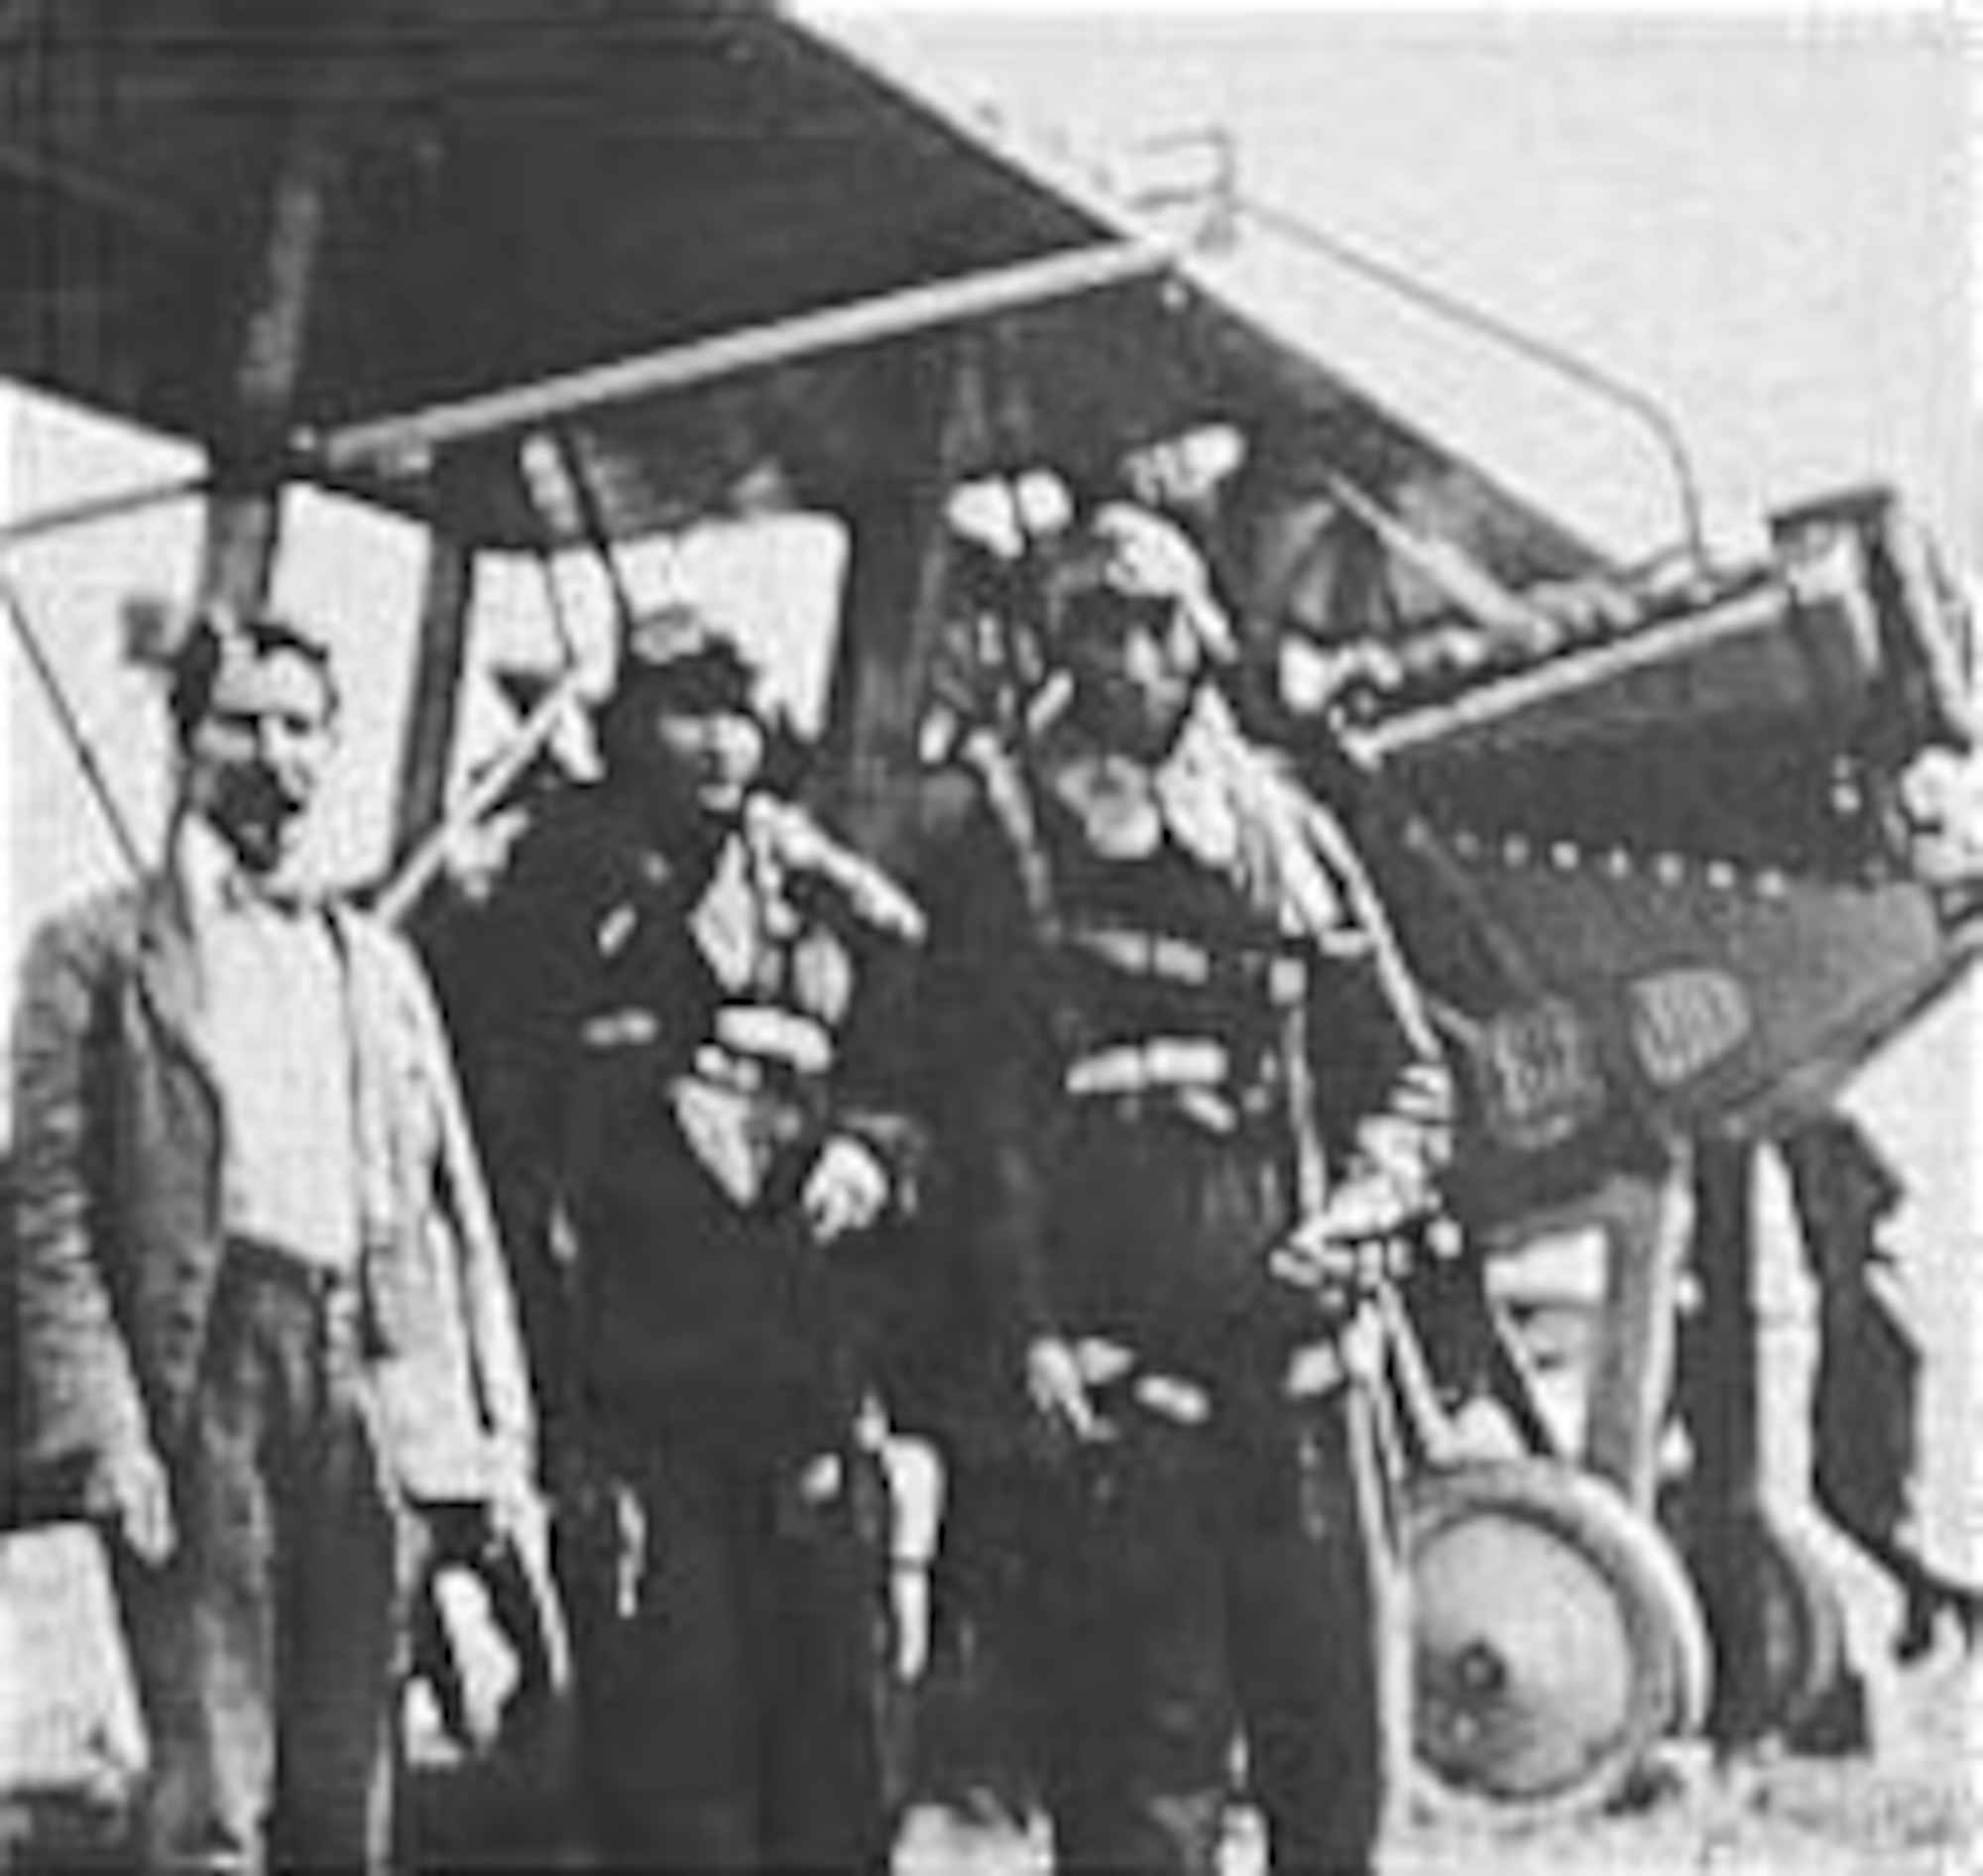 Dr. Sanford Moss (left) with Lt. G.W. Elsey and Capt. Rudolph Schroeder in front of the special LePere LUSAC-11 equipped with an exhaust driven turbo-supercharger built by General Electric. Dr. Moss invented this supercharger and continually improved its design through data obtained during flight tests at McCook Field. (U.S. Air Force photo)